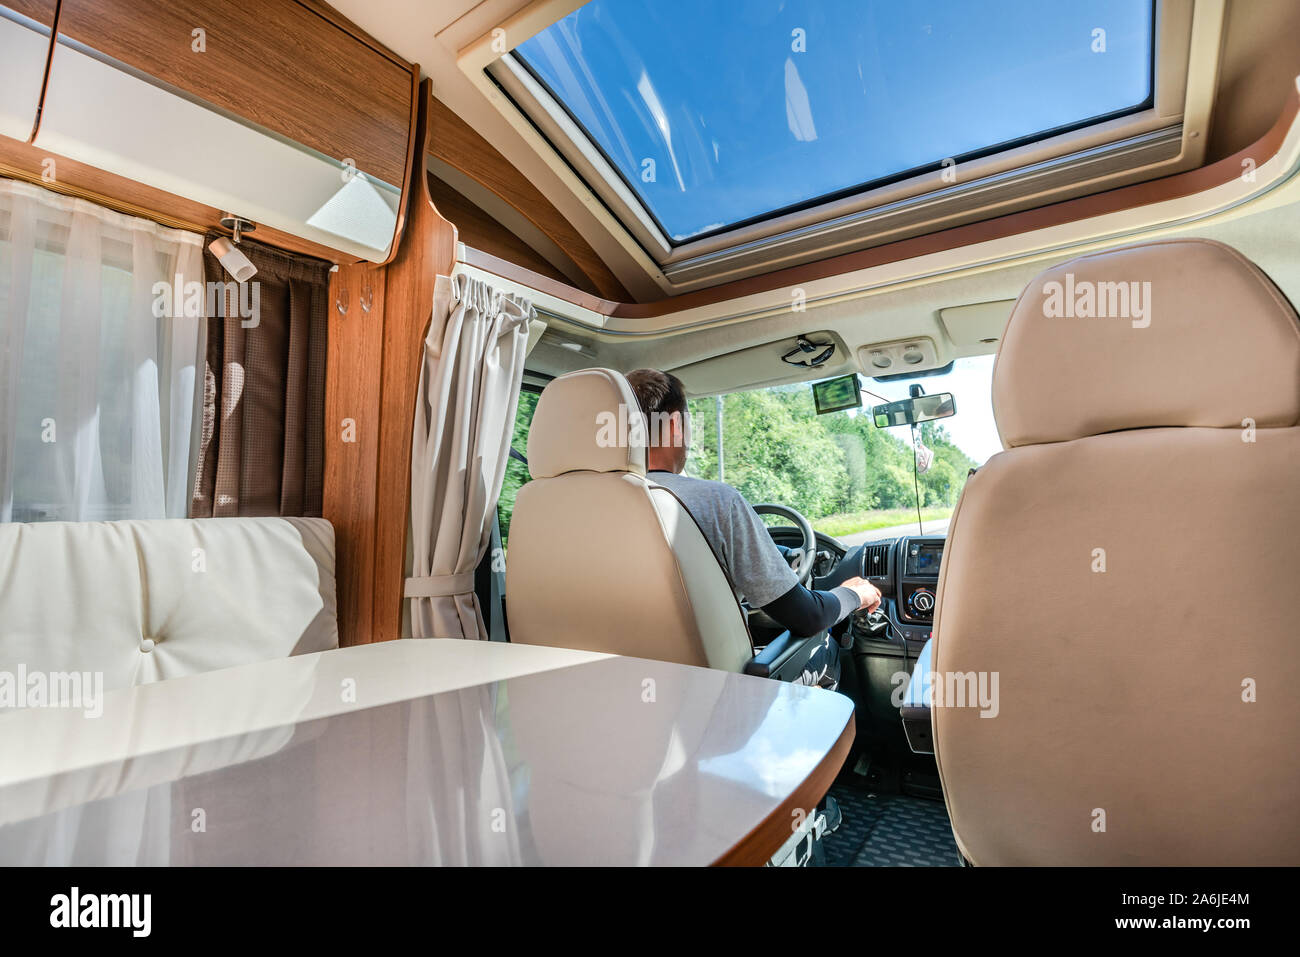 Man driving on a road in the Camper Van RV. Caravan car Vacation. Family vacation travel, holiday trip in motorhome Stock Photo